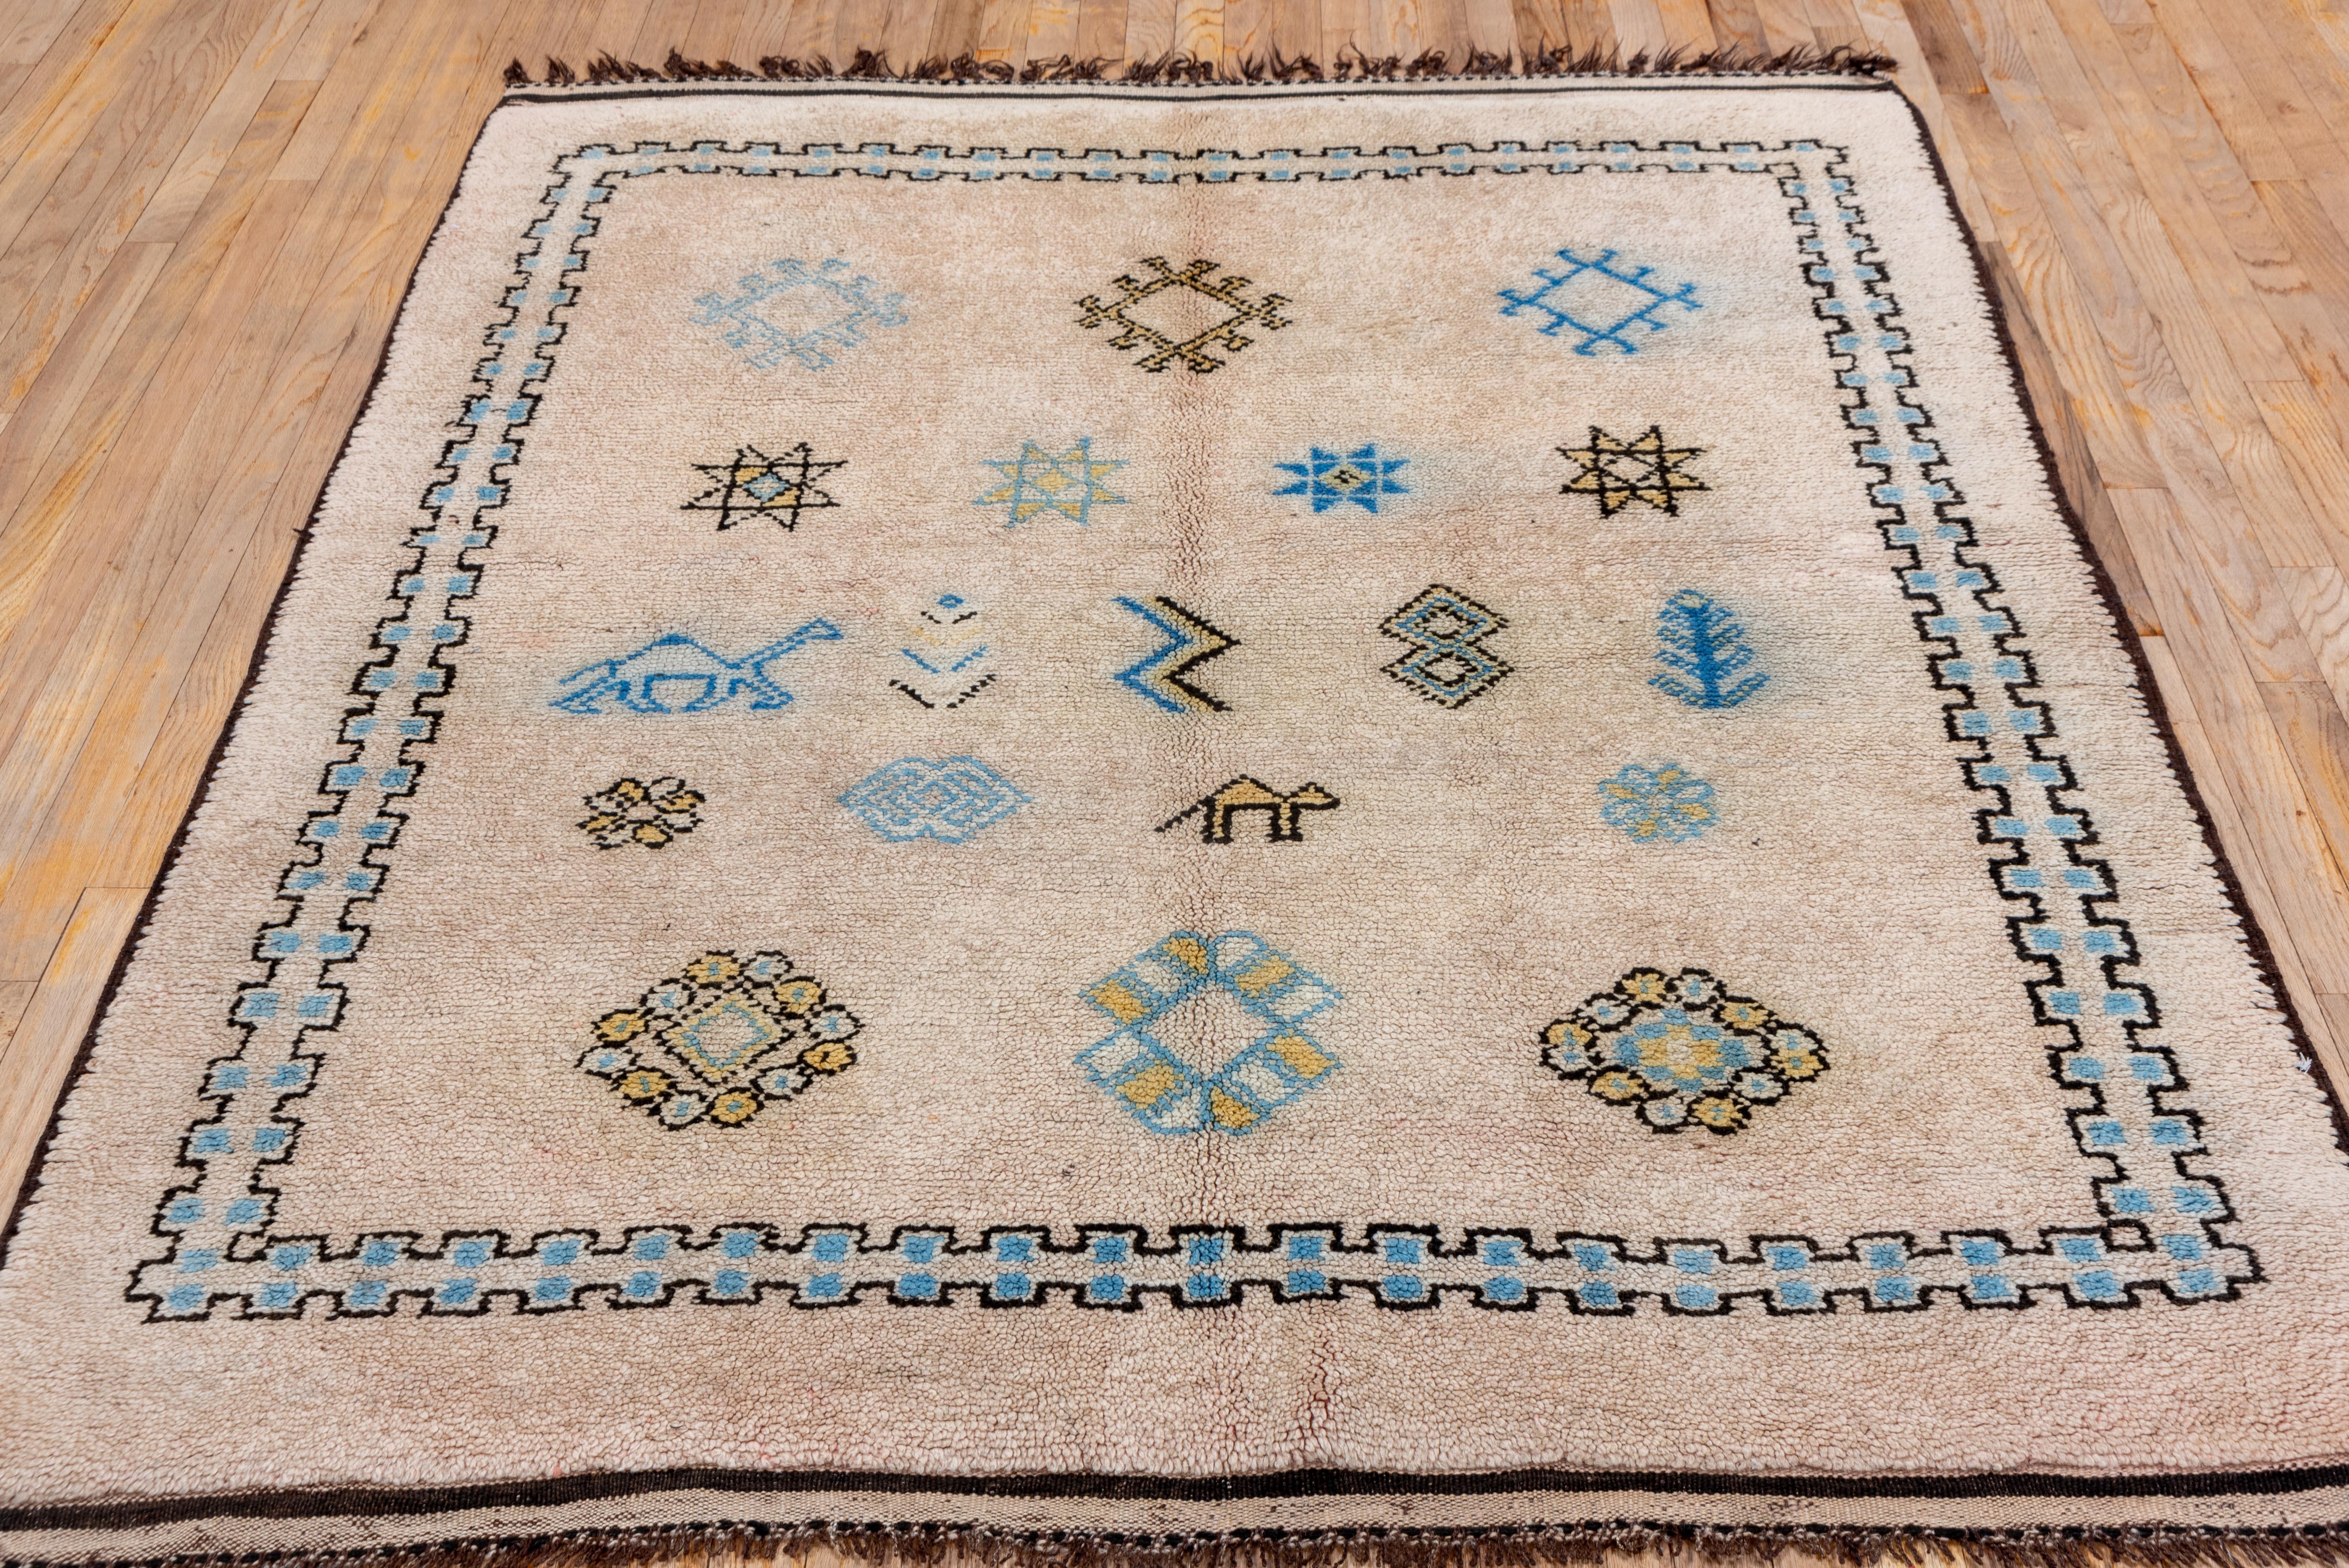 Snowfall in the regions mountains isn't uncommon during the winter months, camels are found in abundance, as well as mountain ranges of varying heights and depths - this rug depicts the local landscape and culture of the mostly un-urbanized country